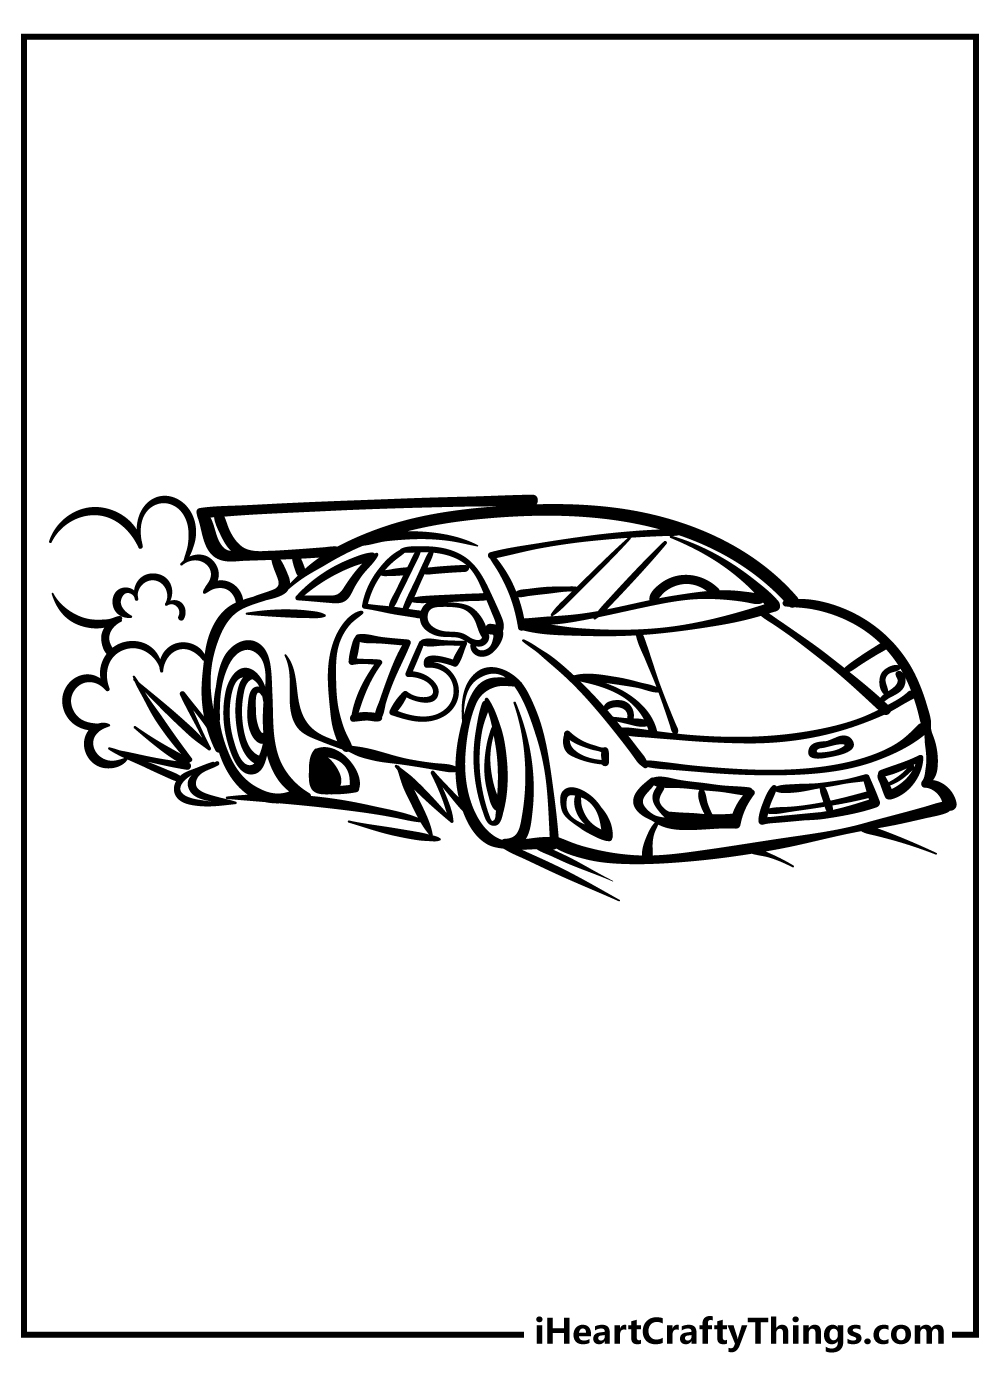 Printable Race Car Coloring Pages (Updated 10) For Blank Race Car Templates